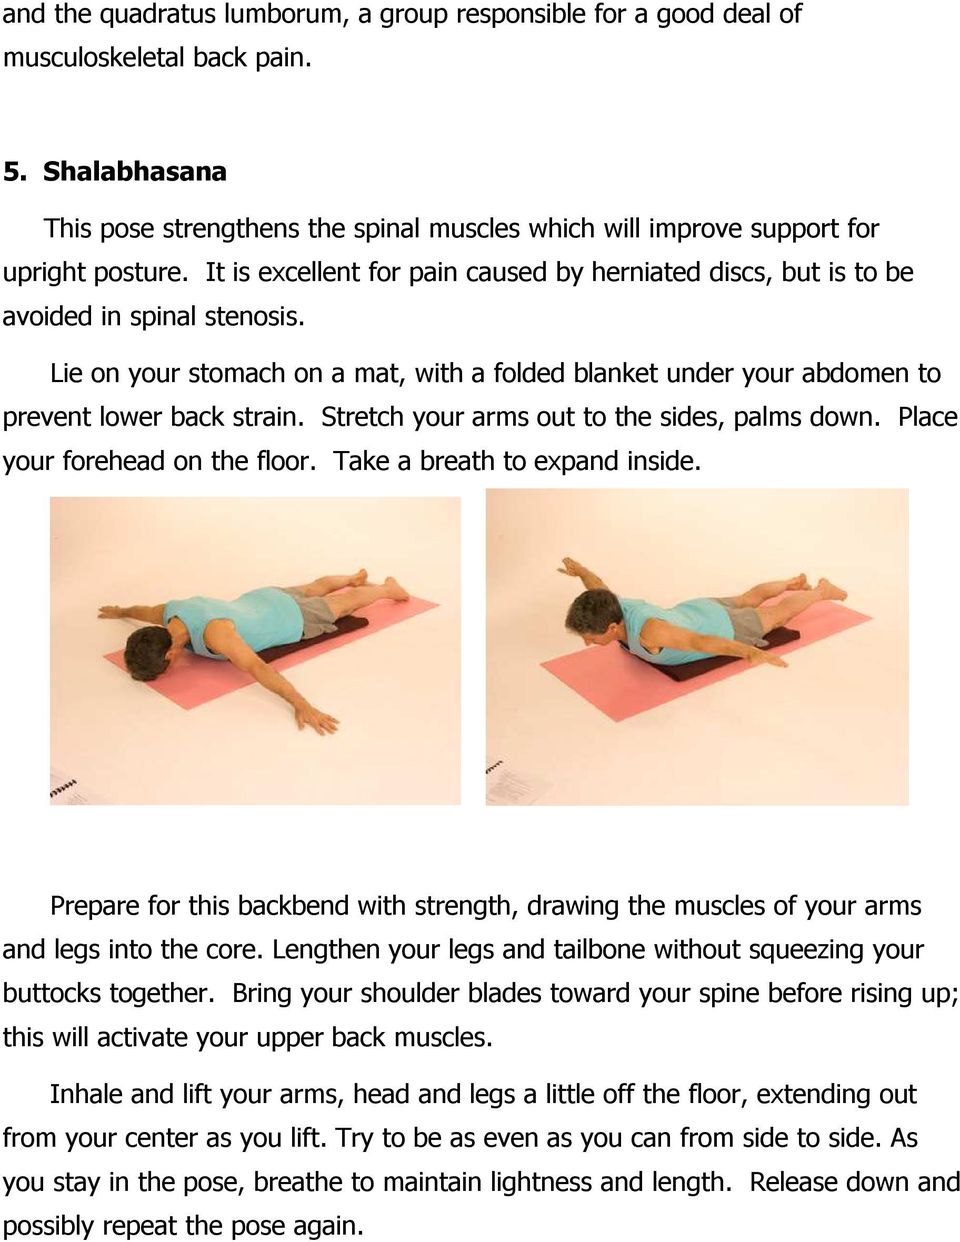 Stretch your arms out to the sides, palms down. Place your forehead on the floor. Take a breath to expand inside.